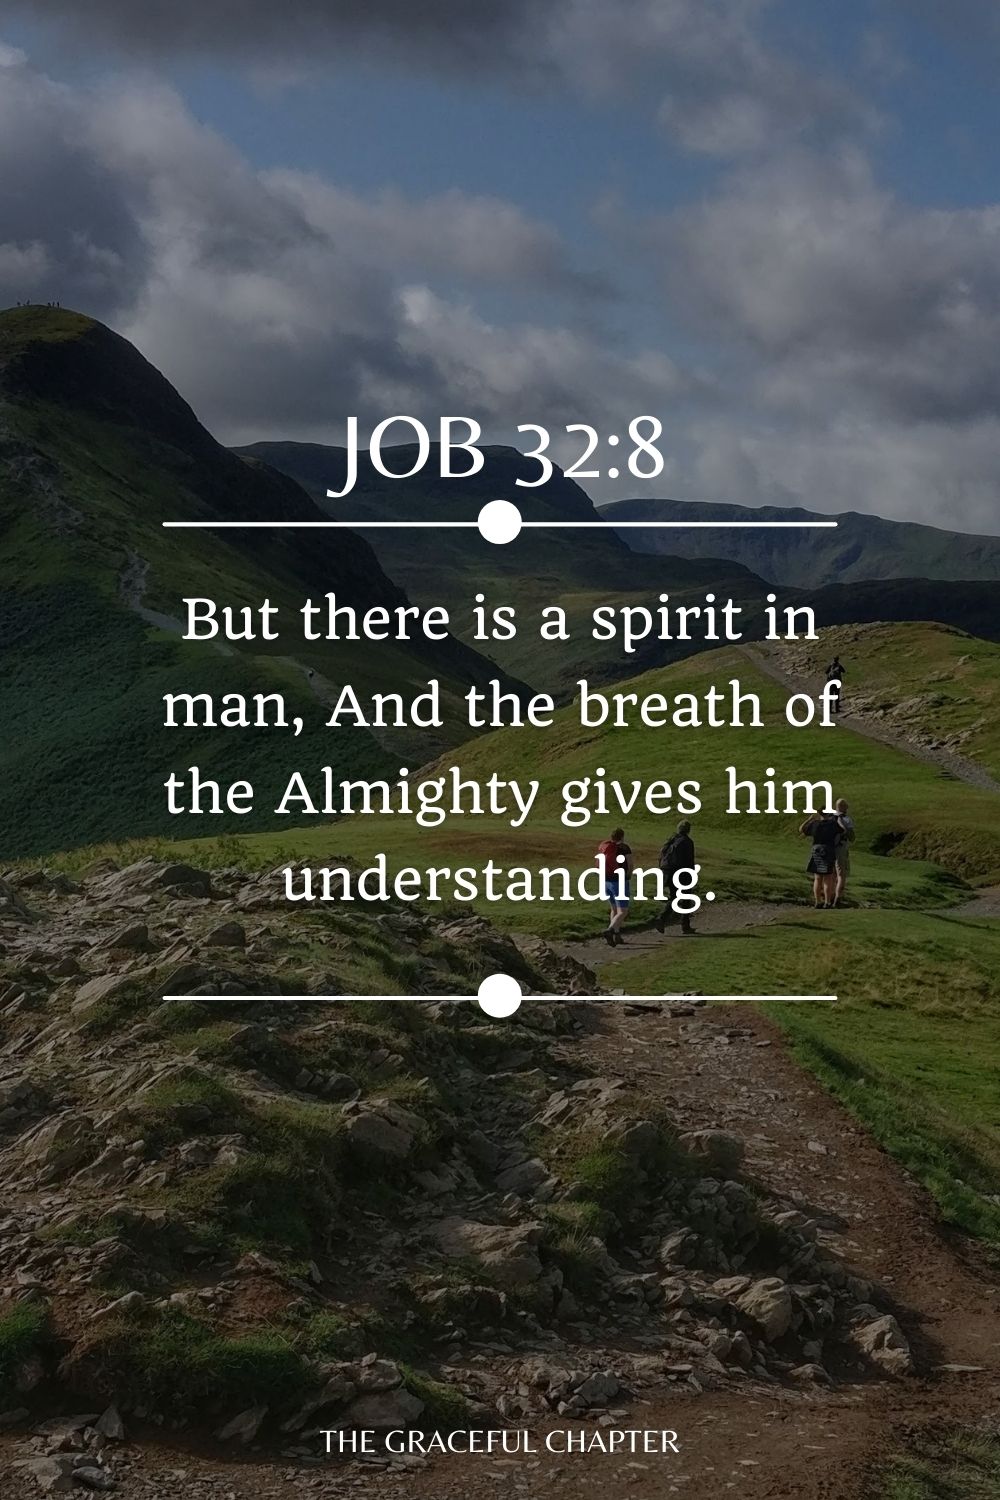 But there is a spirit in man, And the breath of the Almighty gives him understanding. Job 32:8